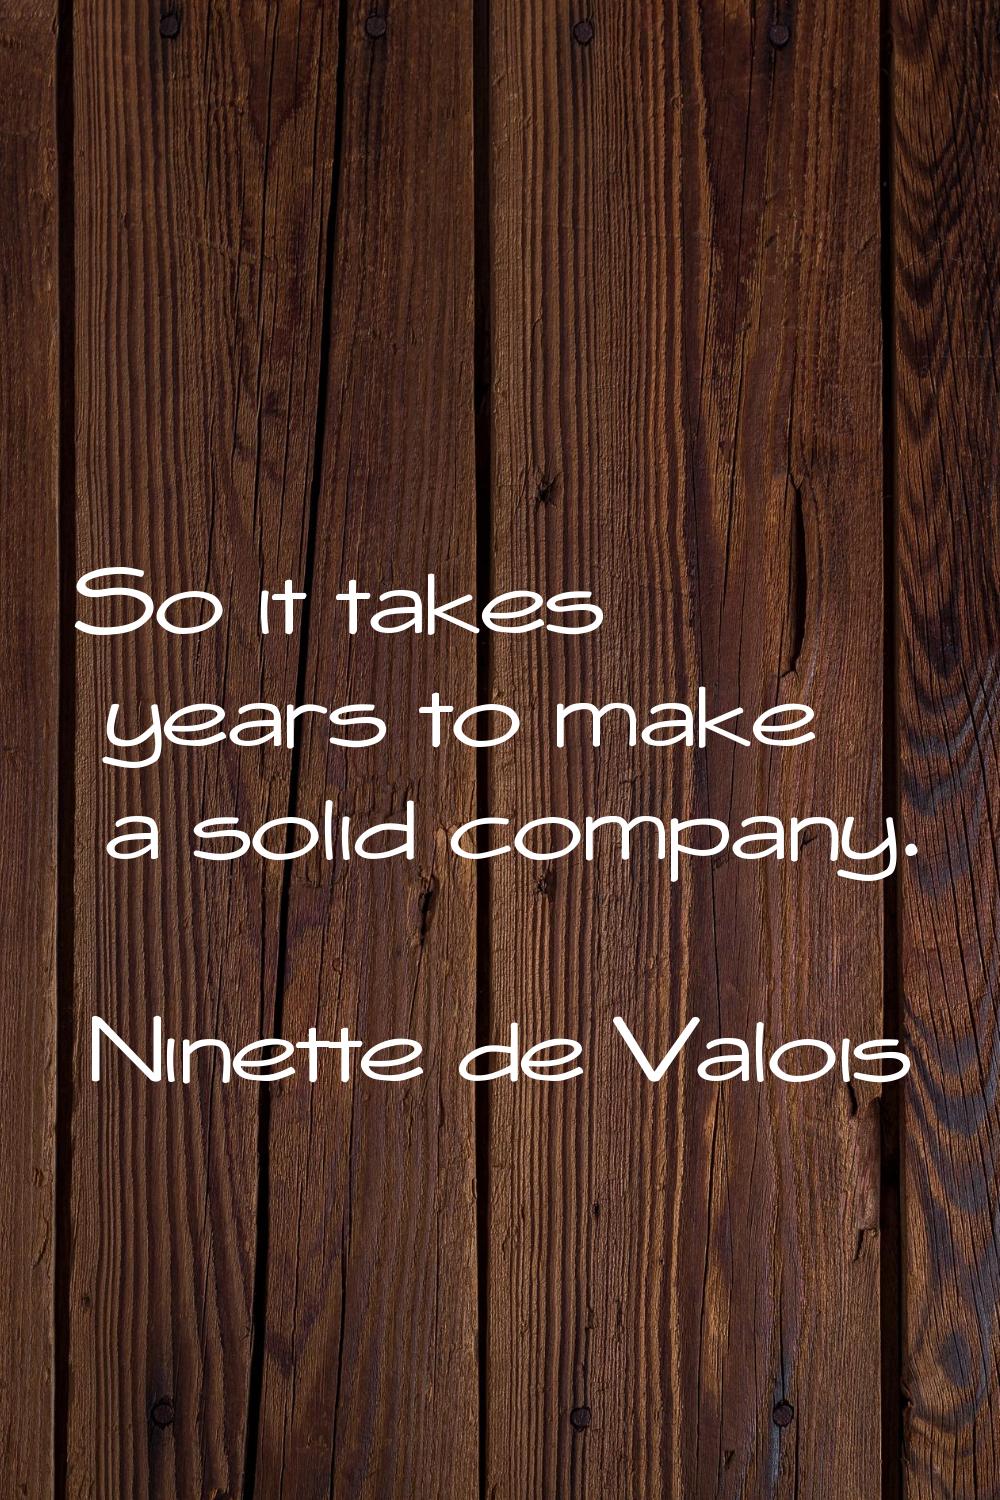 So it takes years to make a solid company.